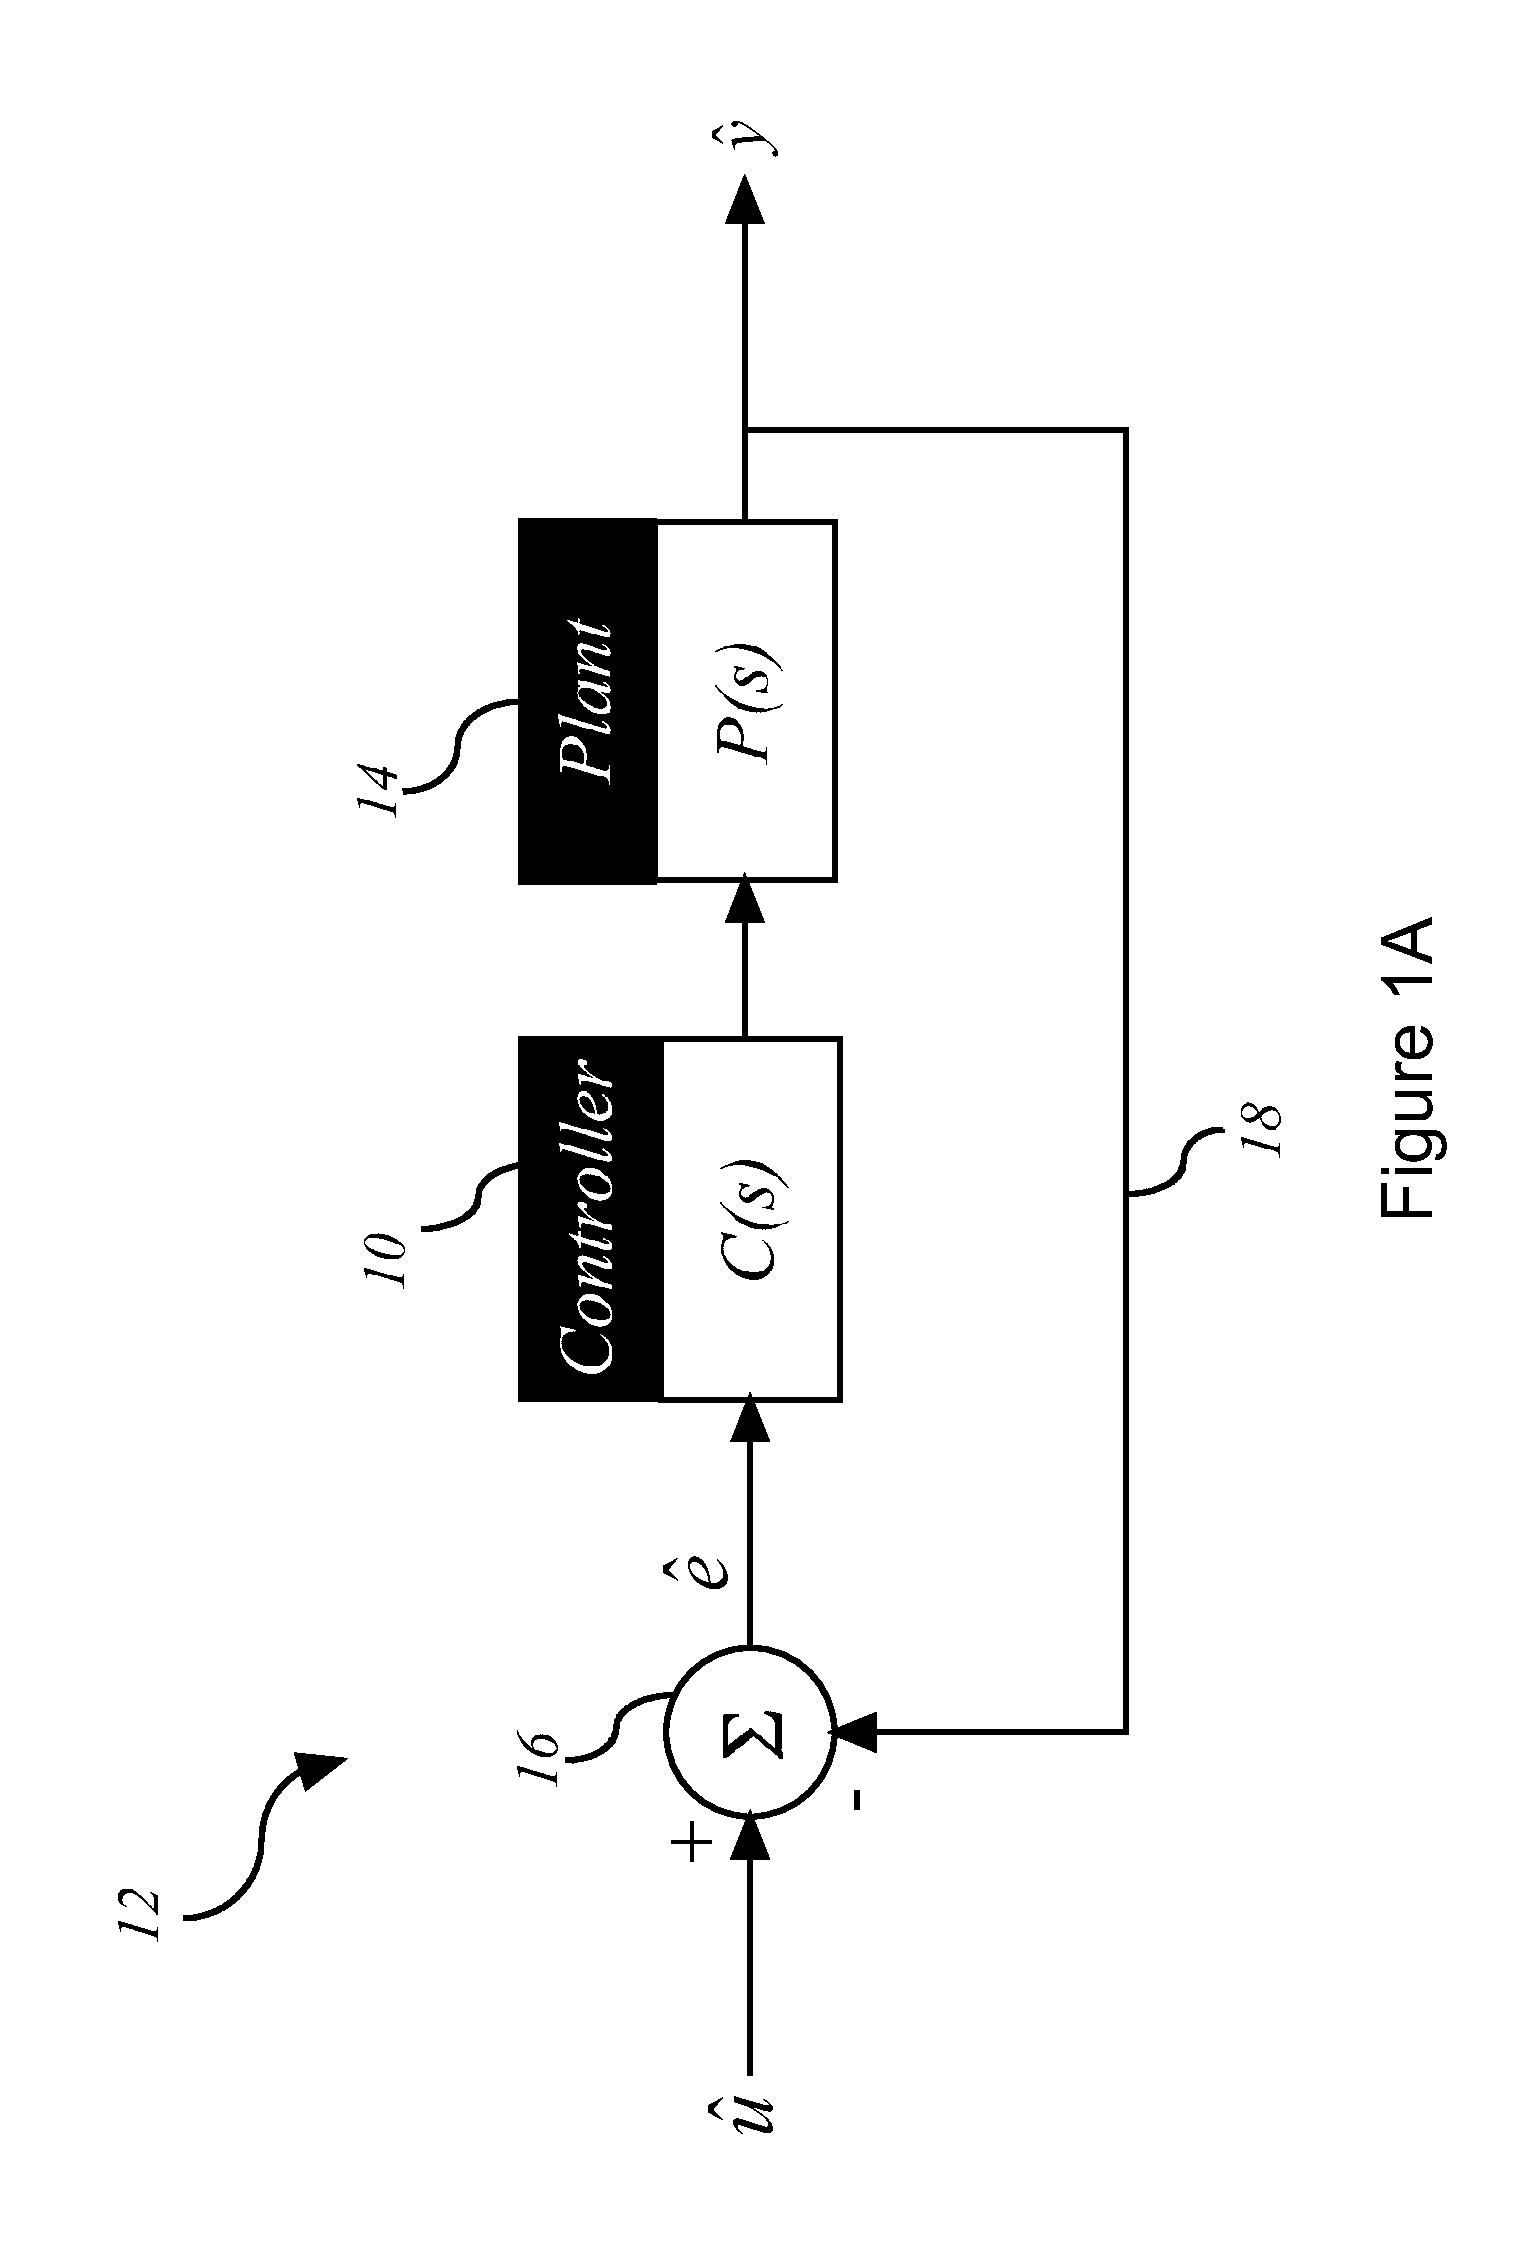 System and method for feedback control